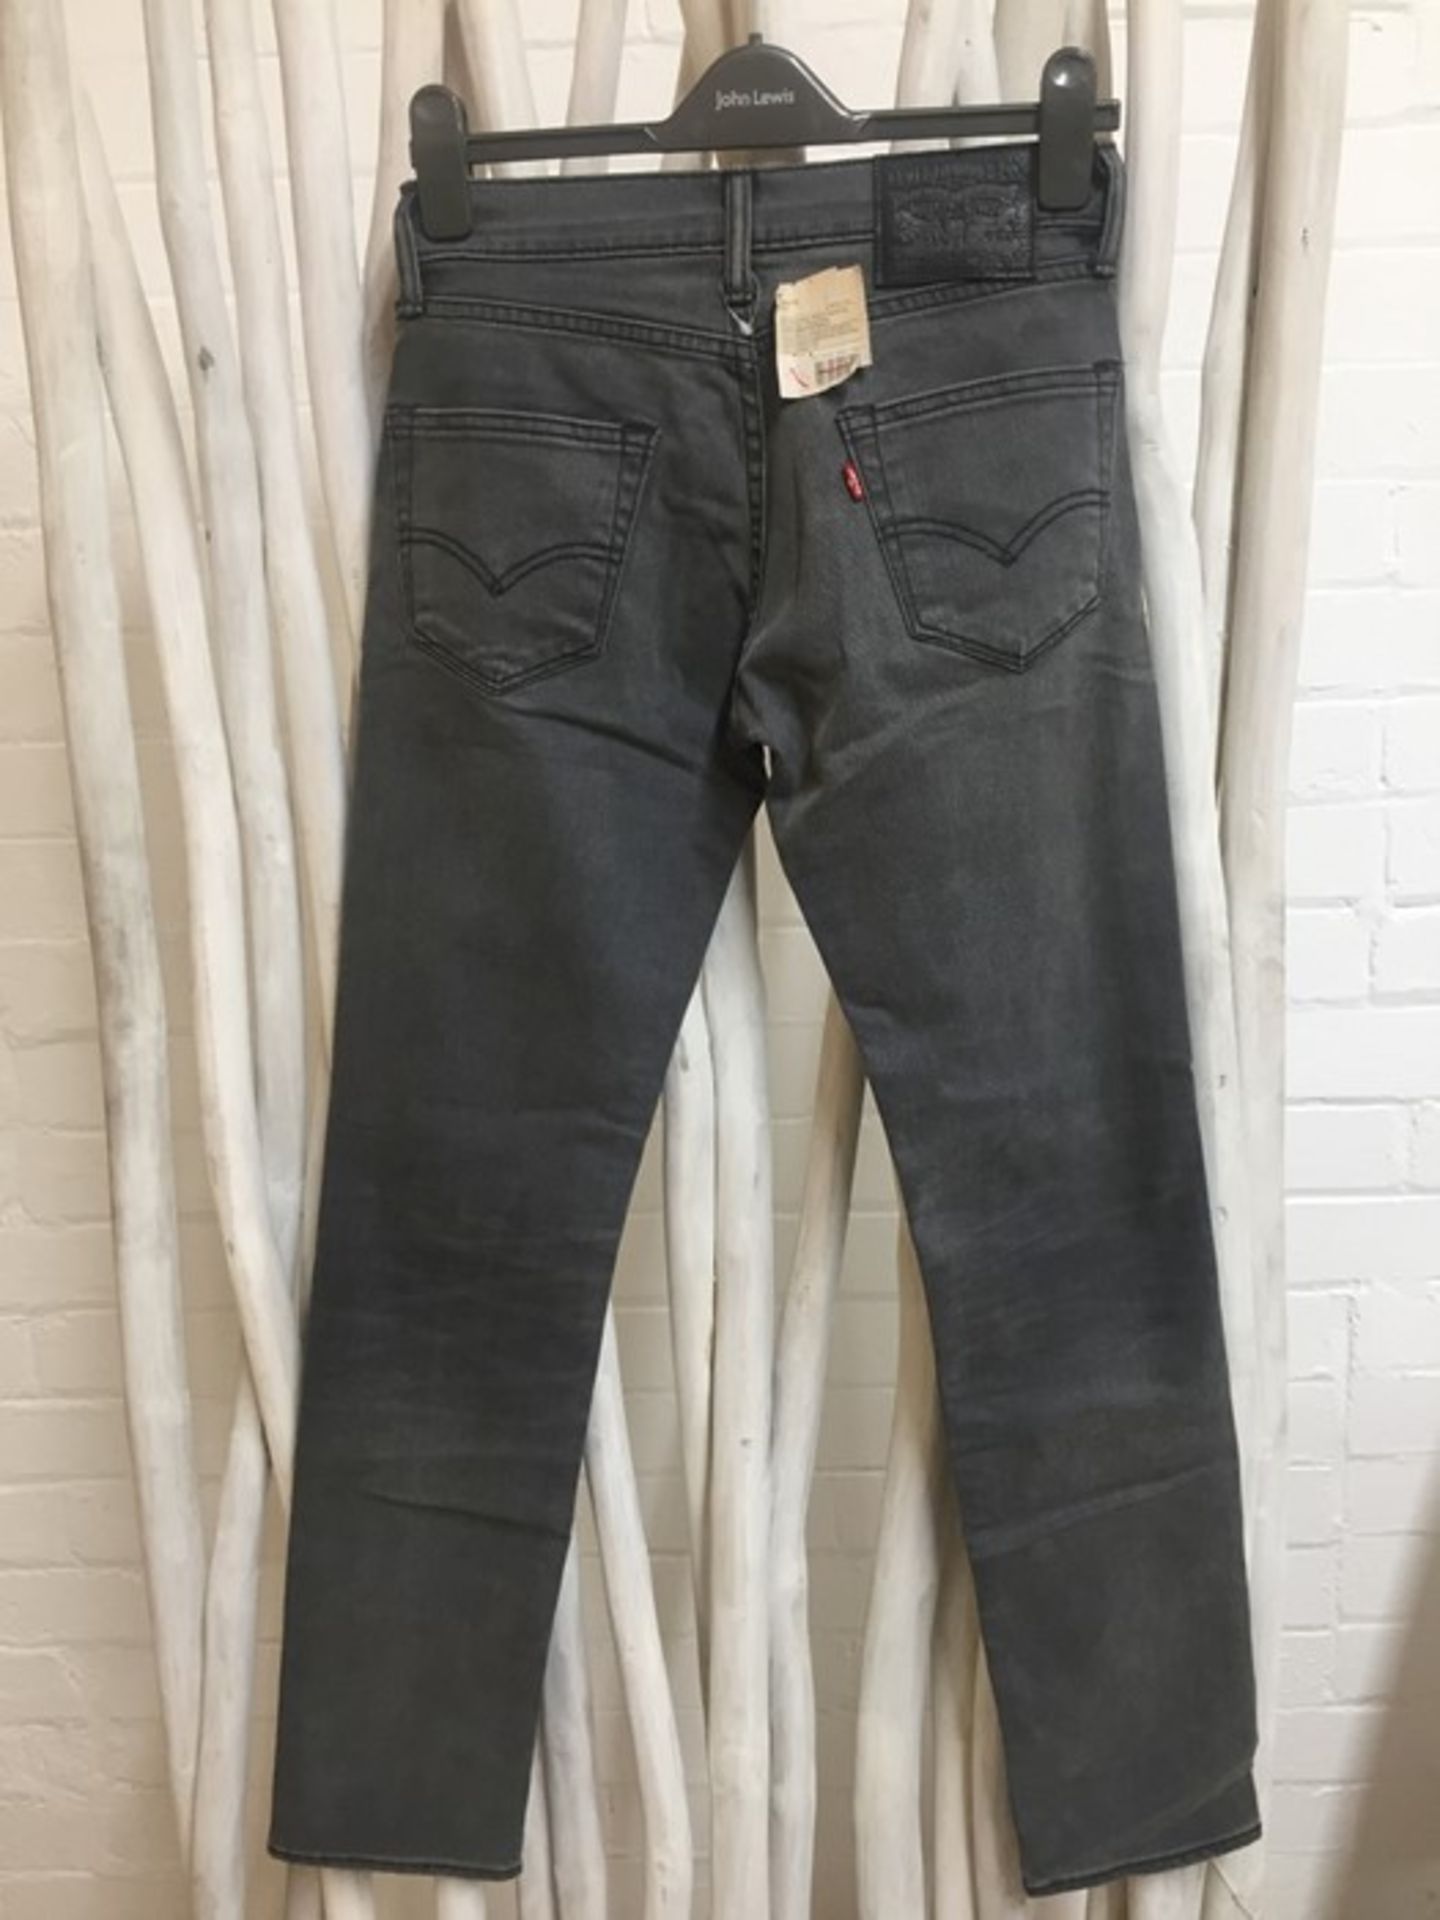 1 LEVI SLIMFIT 511 SLATE GREY JEANS IN W28 L32 / RRP £115.00 (PUBLIC VIEWING AVAILABLE)